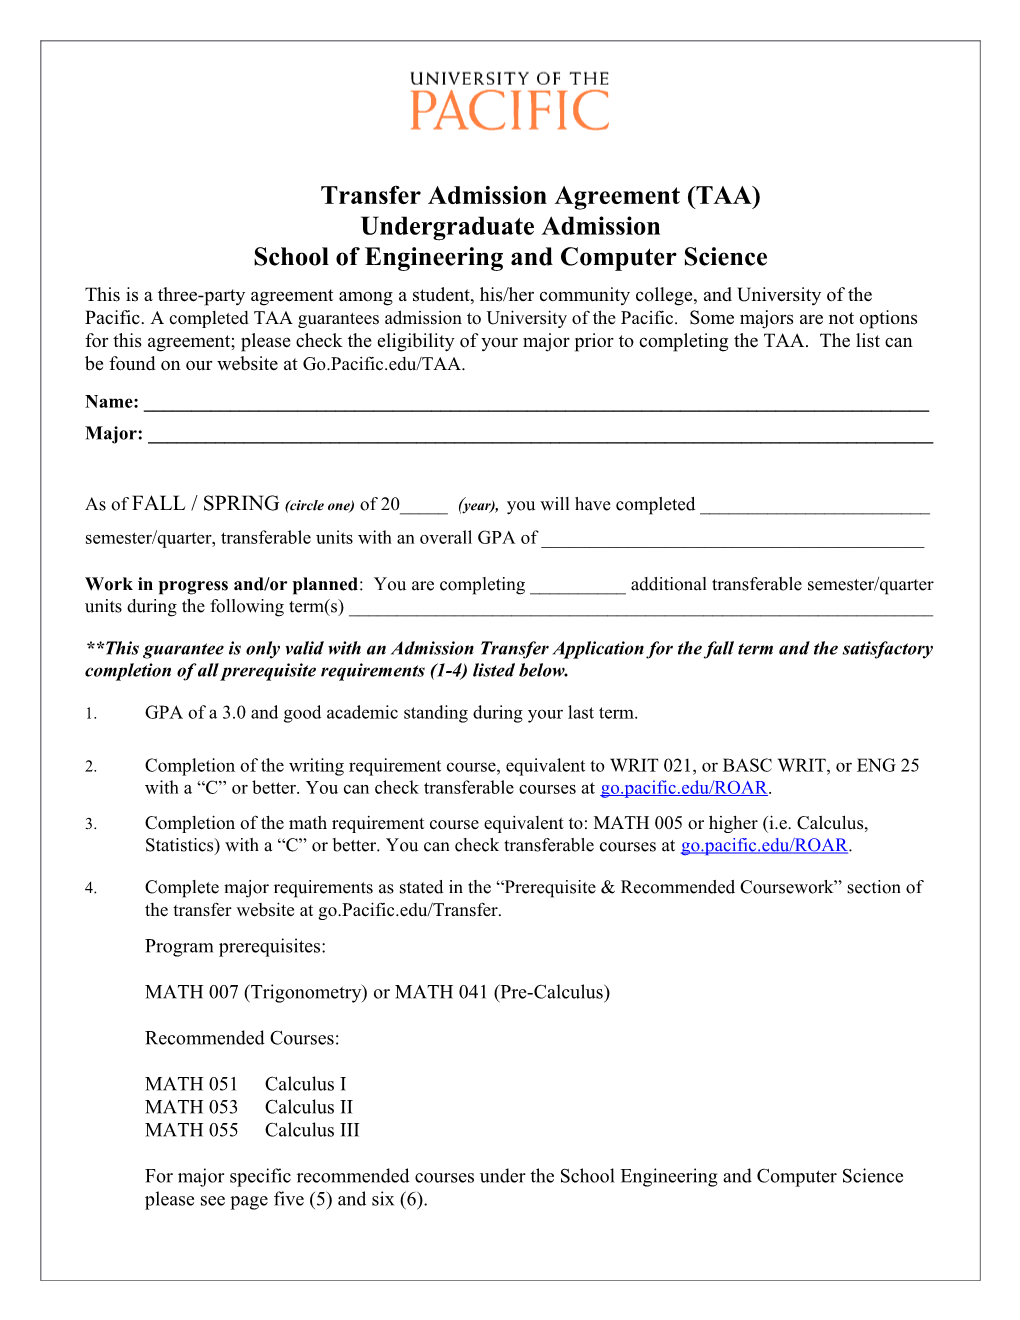 Transfer Admission Agreement (TAA)